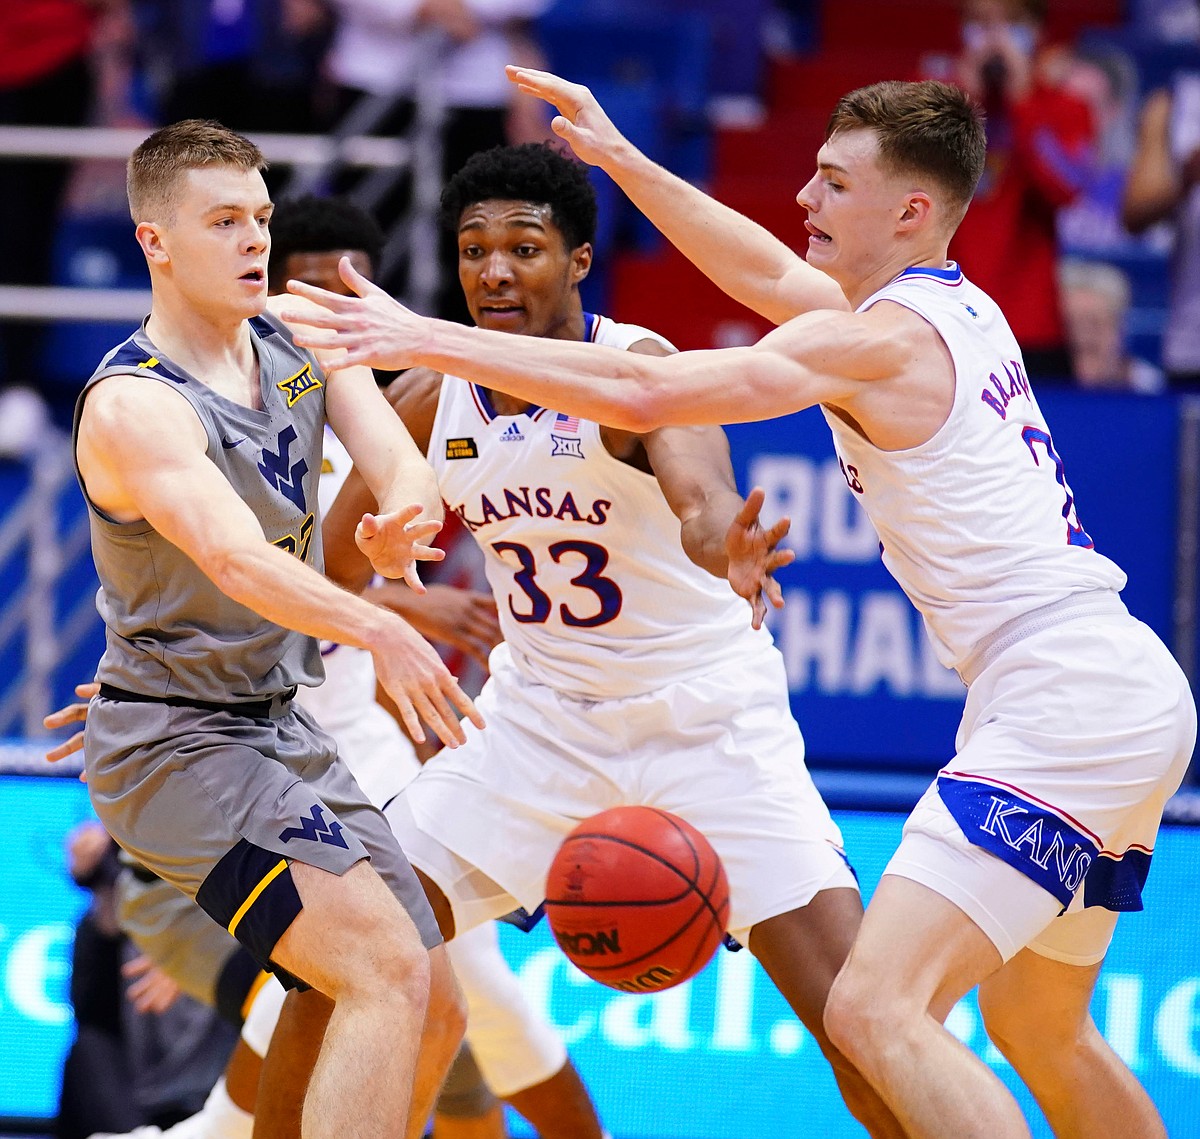 Breaking down the 202122 Kansas basketball roster as things stand